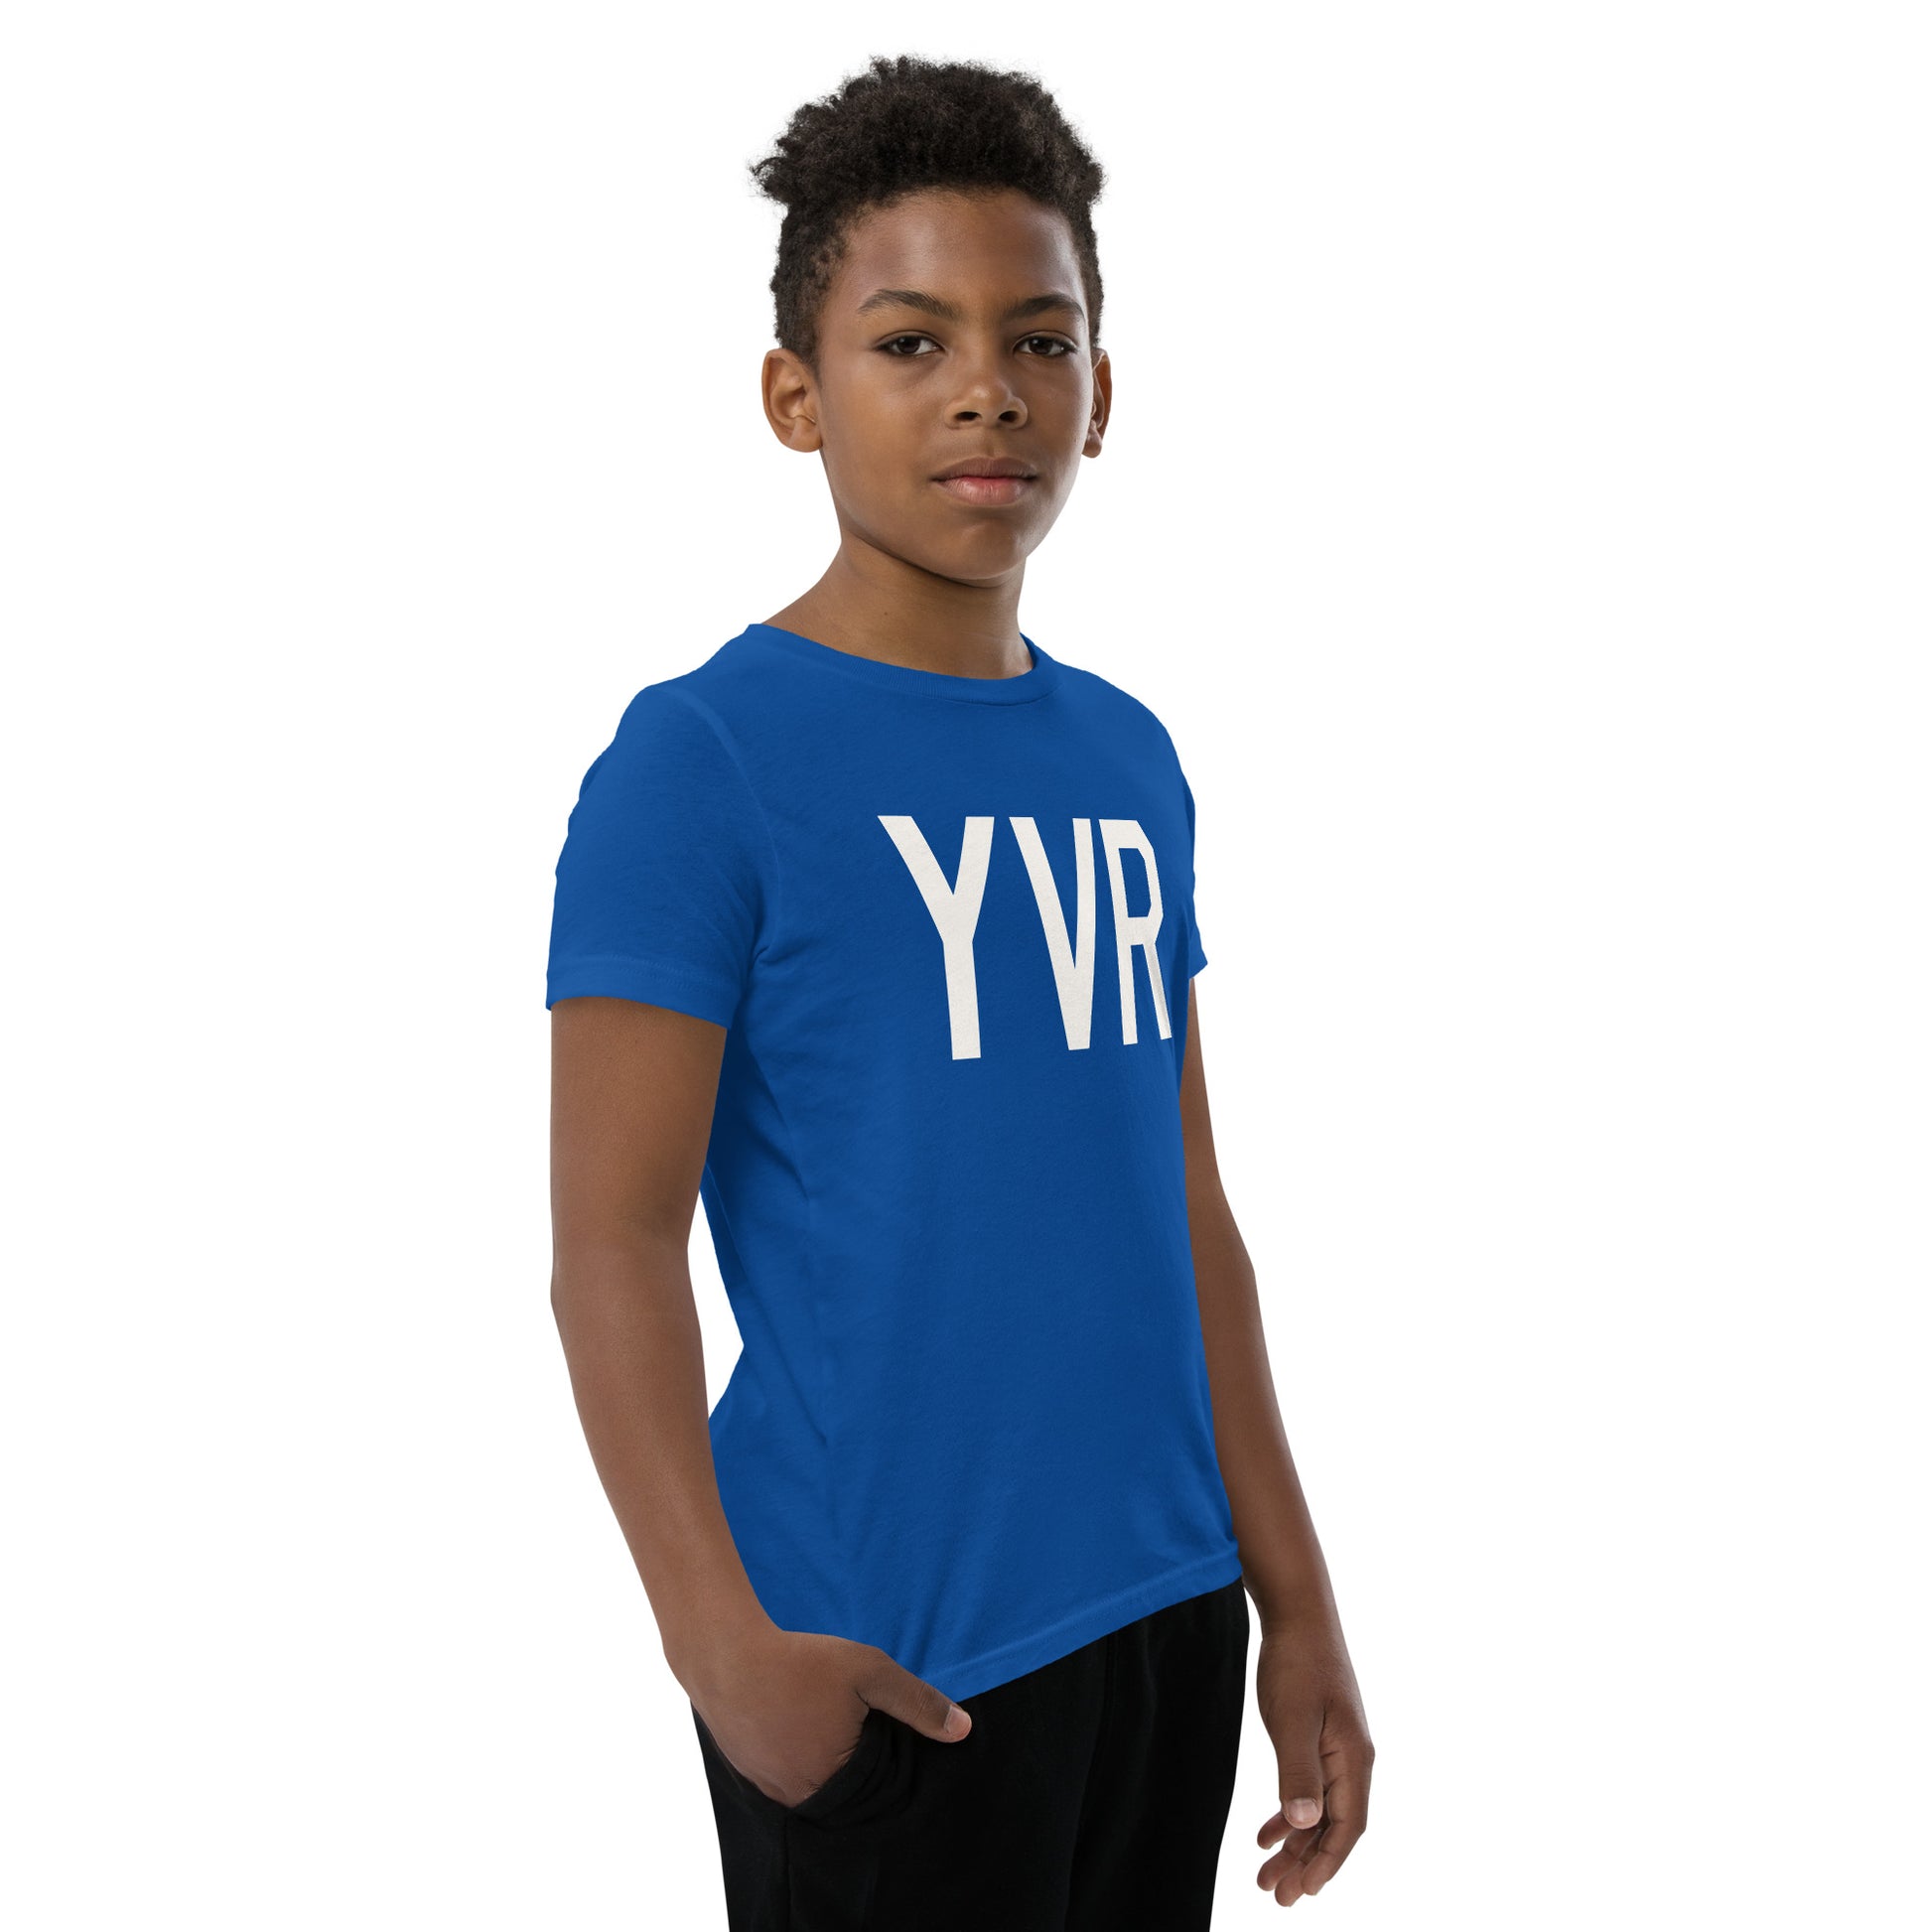 Kid's T-Shirt - White Graphic • YVR Vancouver • YHM Designs - Image 12